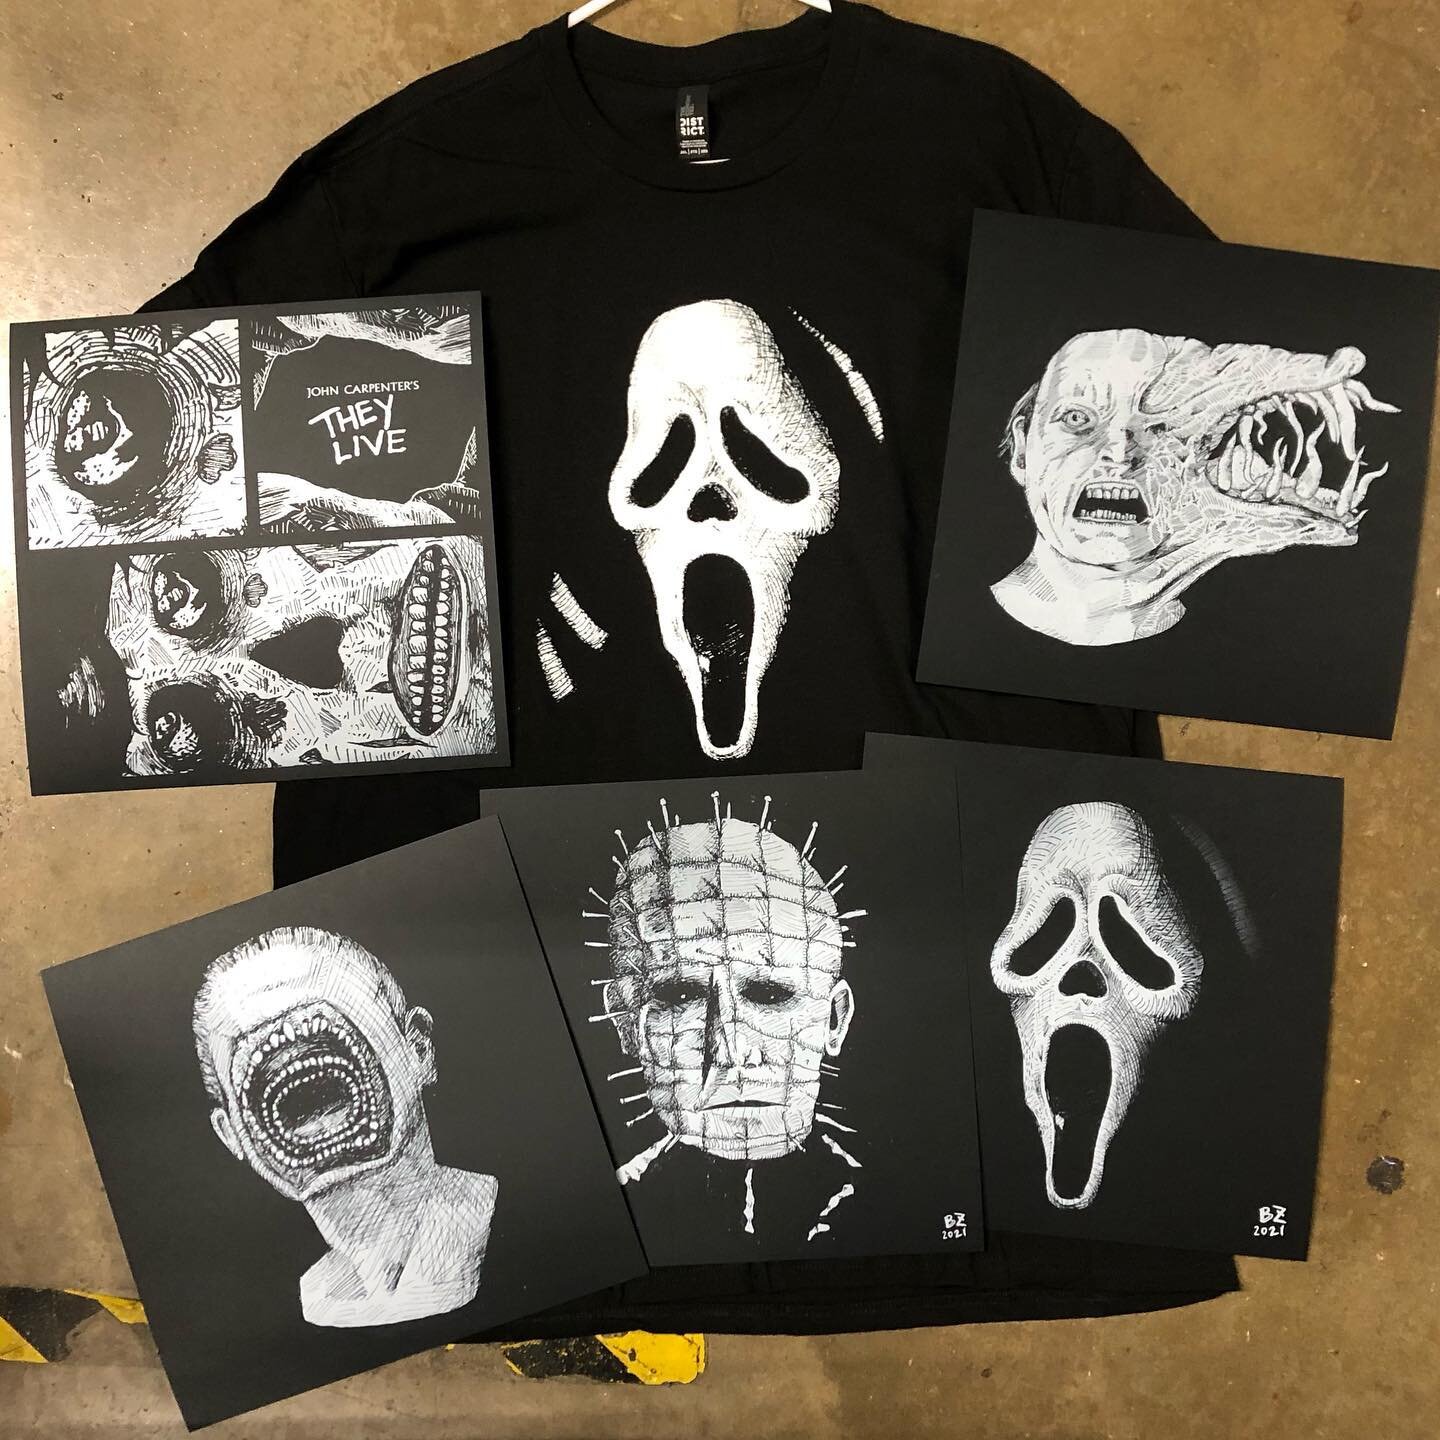 Today&rsquo;s #wpspotlight is @reelbenzilla&rsquo;s #whitetoner #horror prints on #epicblack #neenah paper. Plus a bonus #shirtprint!

We&rsquo;re excited about this product cross pollination! Bonus model shot at the end&mdash;
.
.
.
.
#shirtprinting